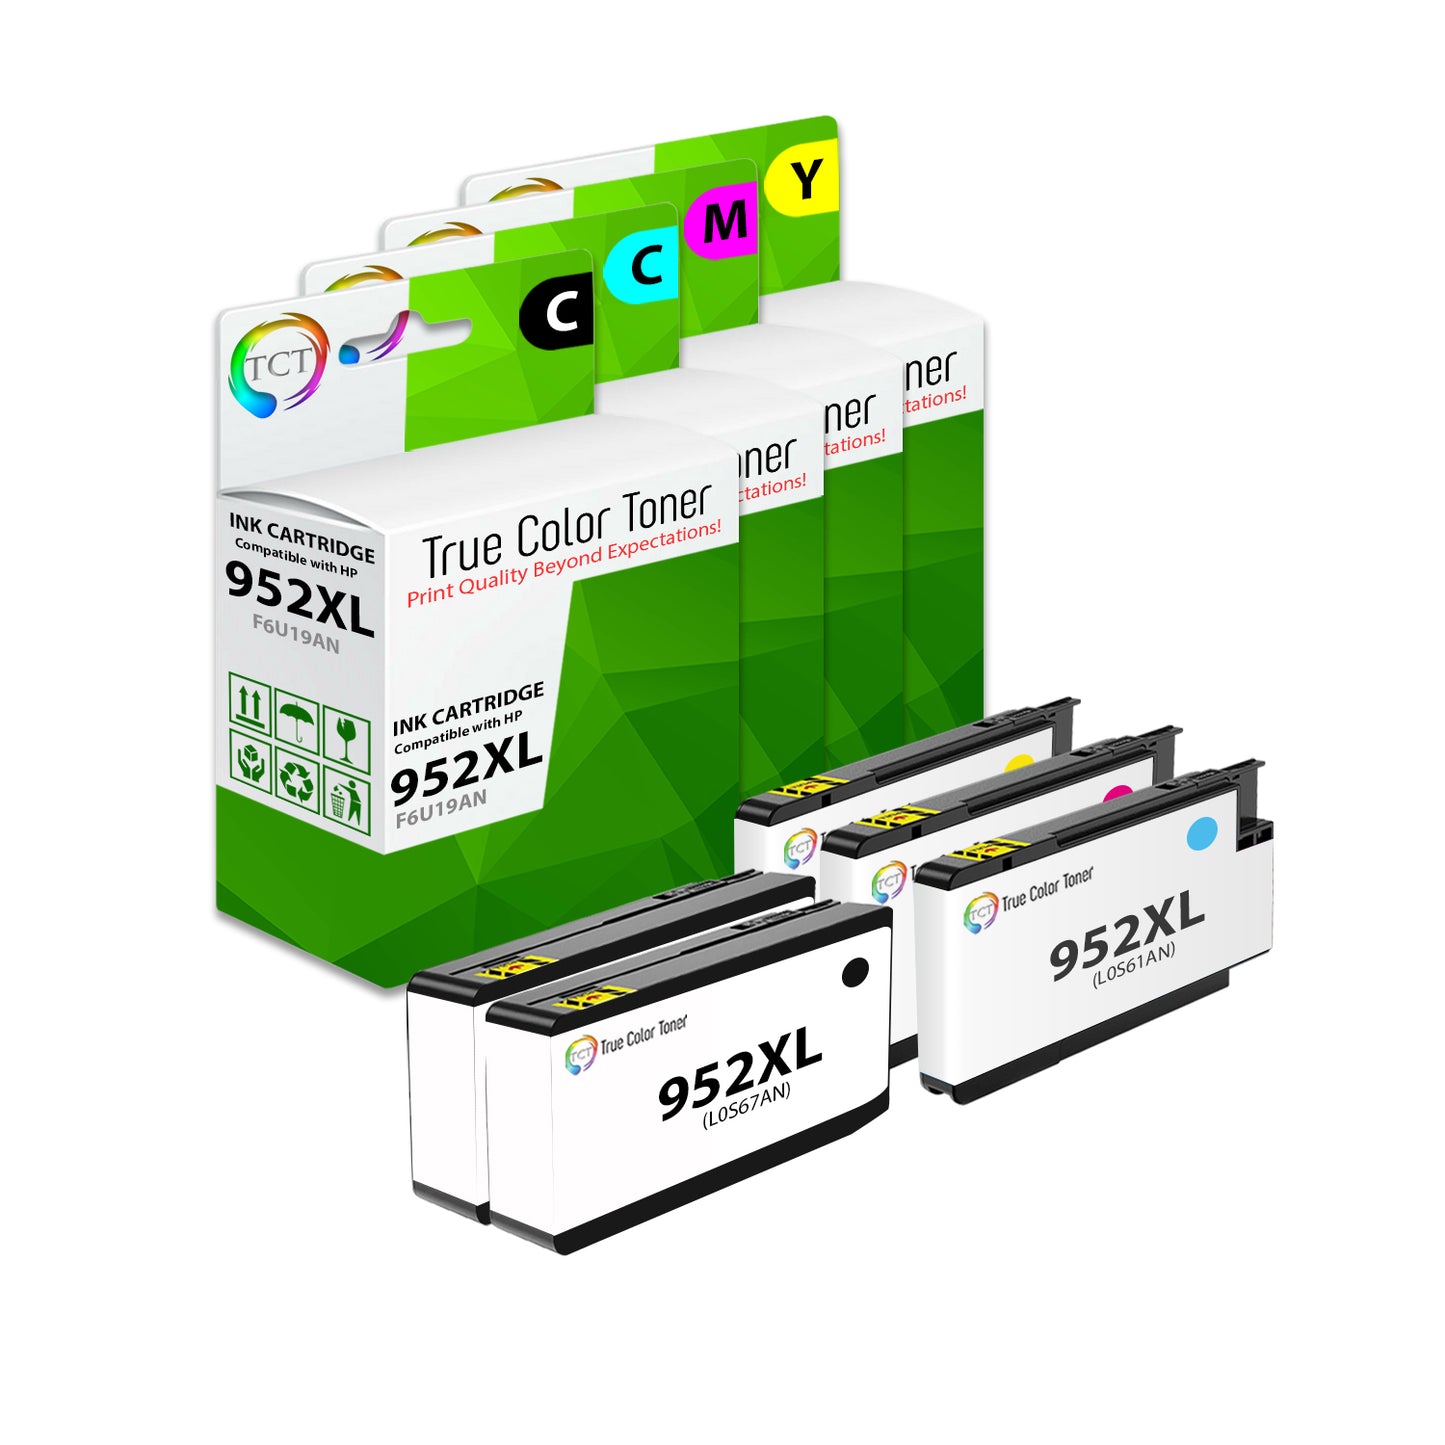 TCT Compatible Ink Cartridge Replacement for the HP 952XL Series - 5 Pack (B, C, M, Y)